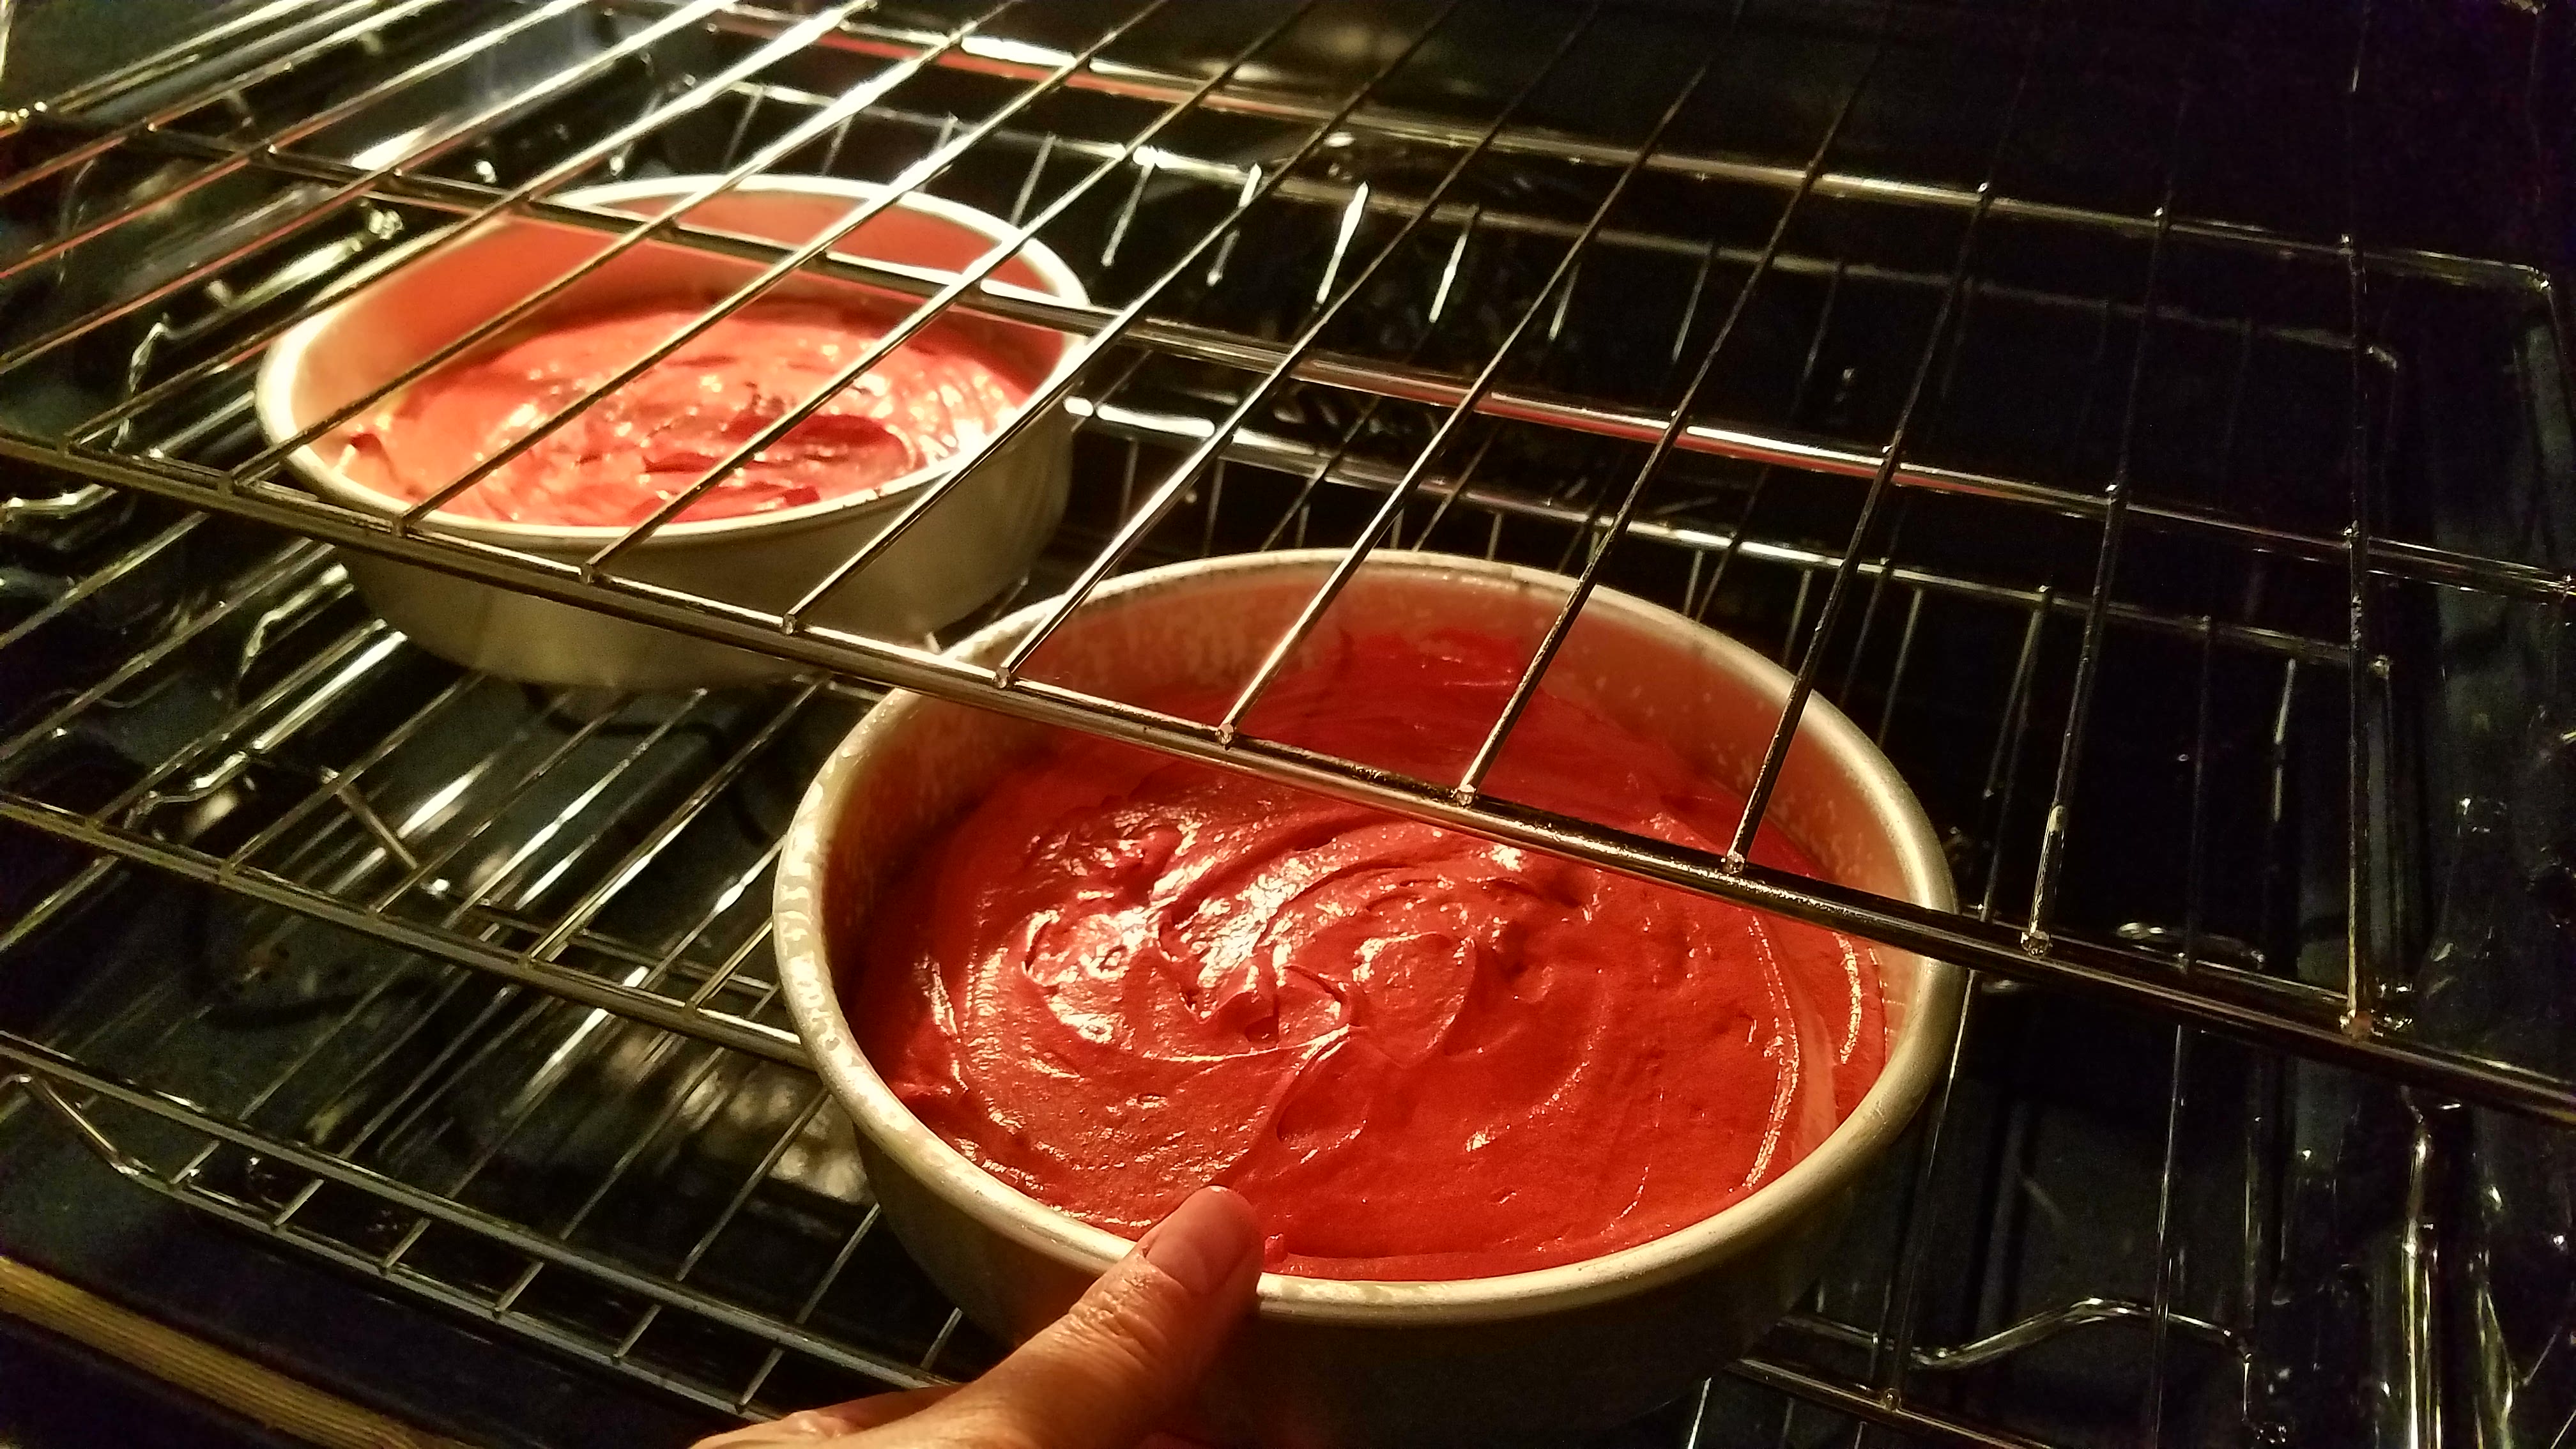 Placing the pans of red velvet cake into the oven to bake. 